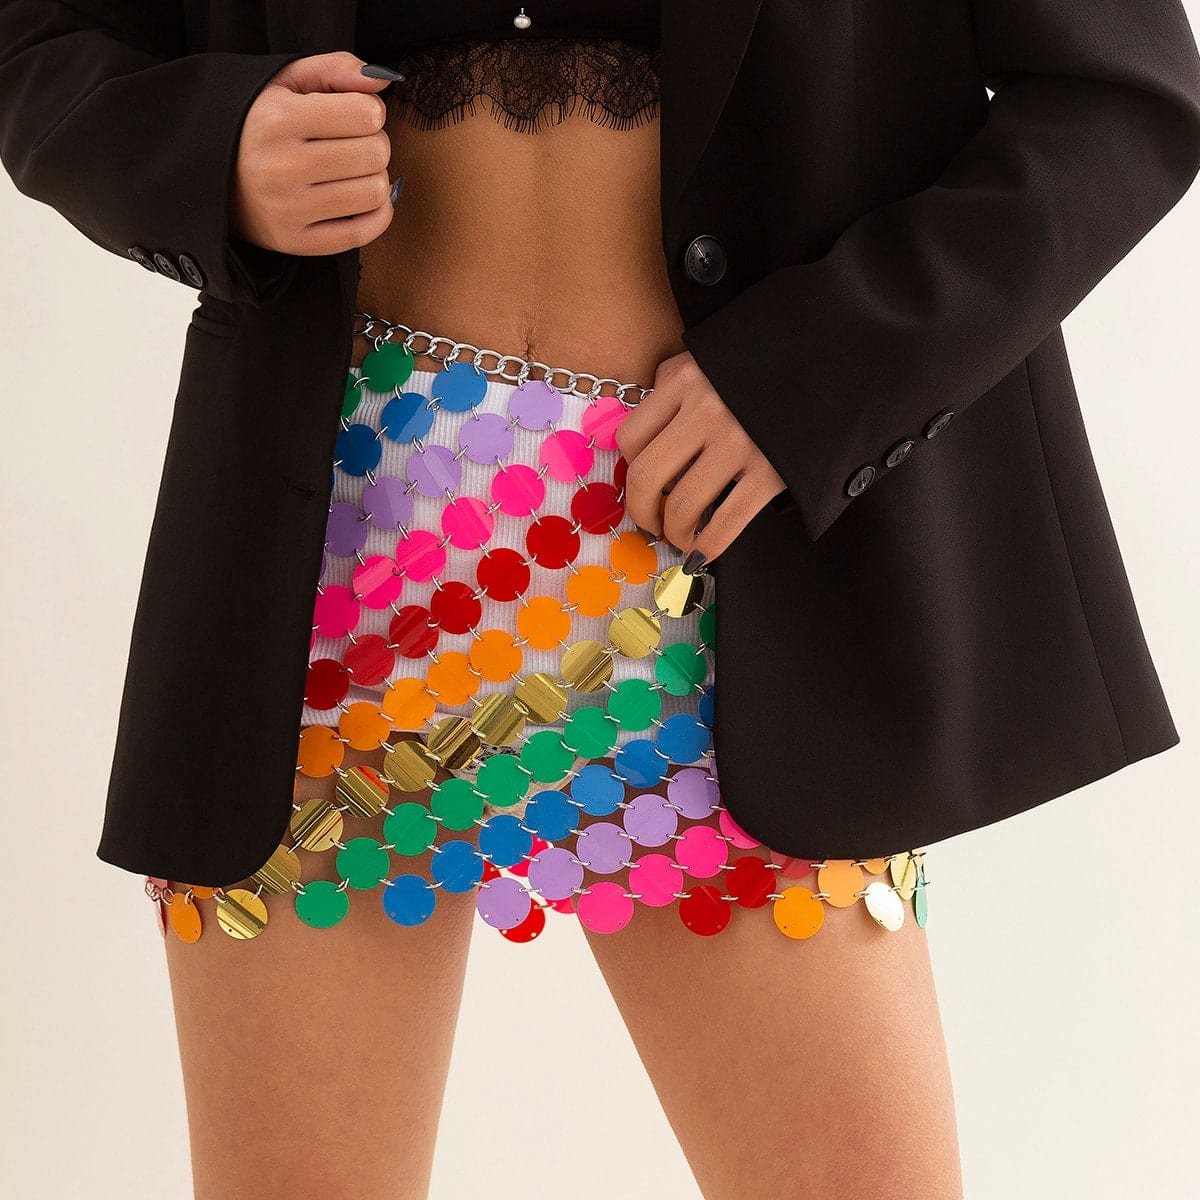 Handmade Rainbow Squamous Glitter Sequins Patchwork Strappy Nightclub Party Skirt